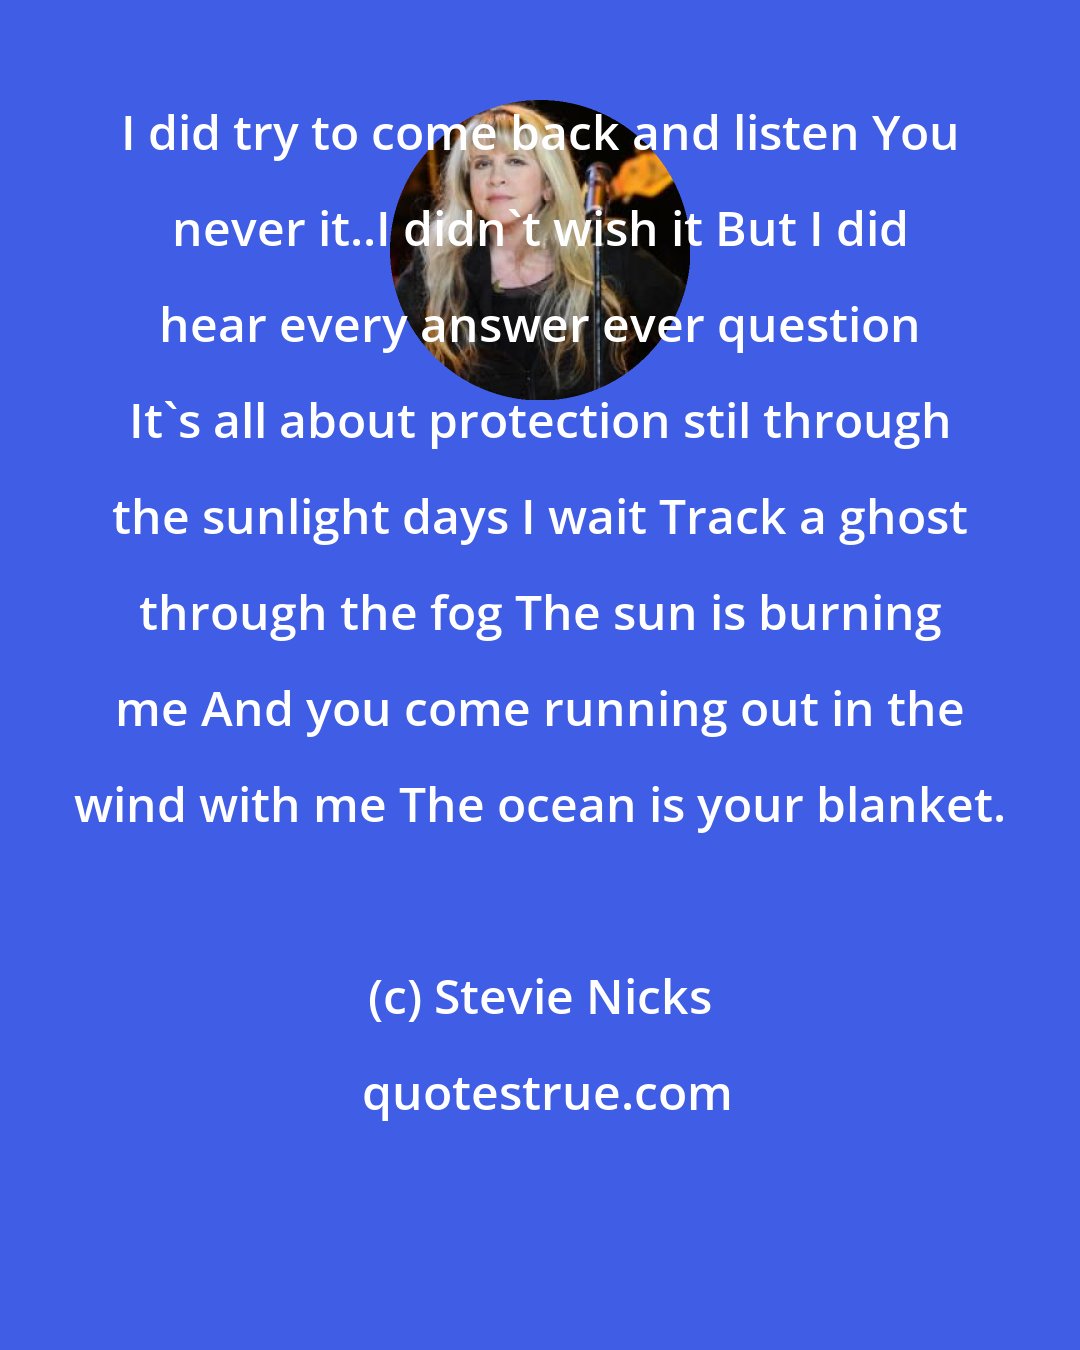 Stevie Nicks: I did try to come back and listen You never it..I didn't wish it But I did hear every answer ever question It's all about protection stil through the sunlight days I wait Track a ghost through the fog The sun is burning me And you come running out in the wind with me The ocean is your blanket.